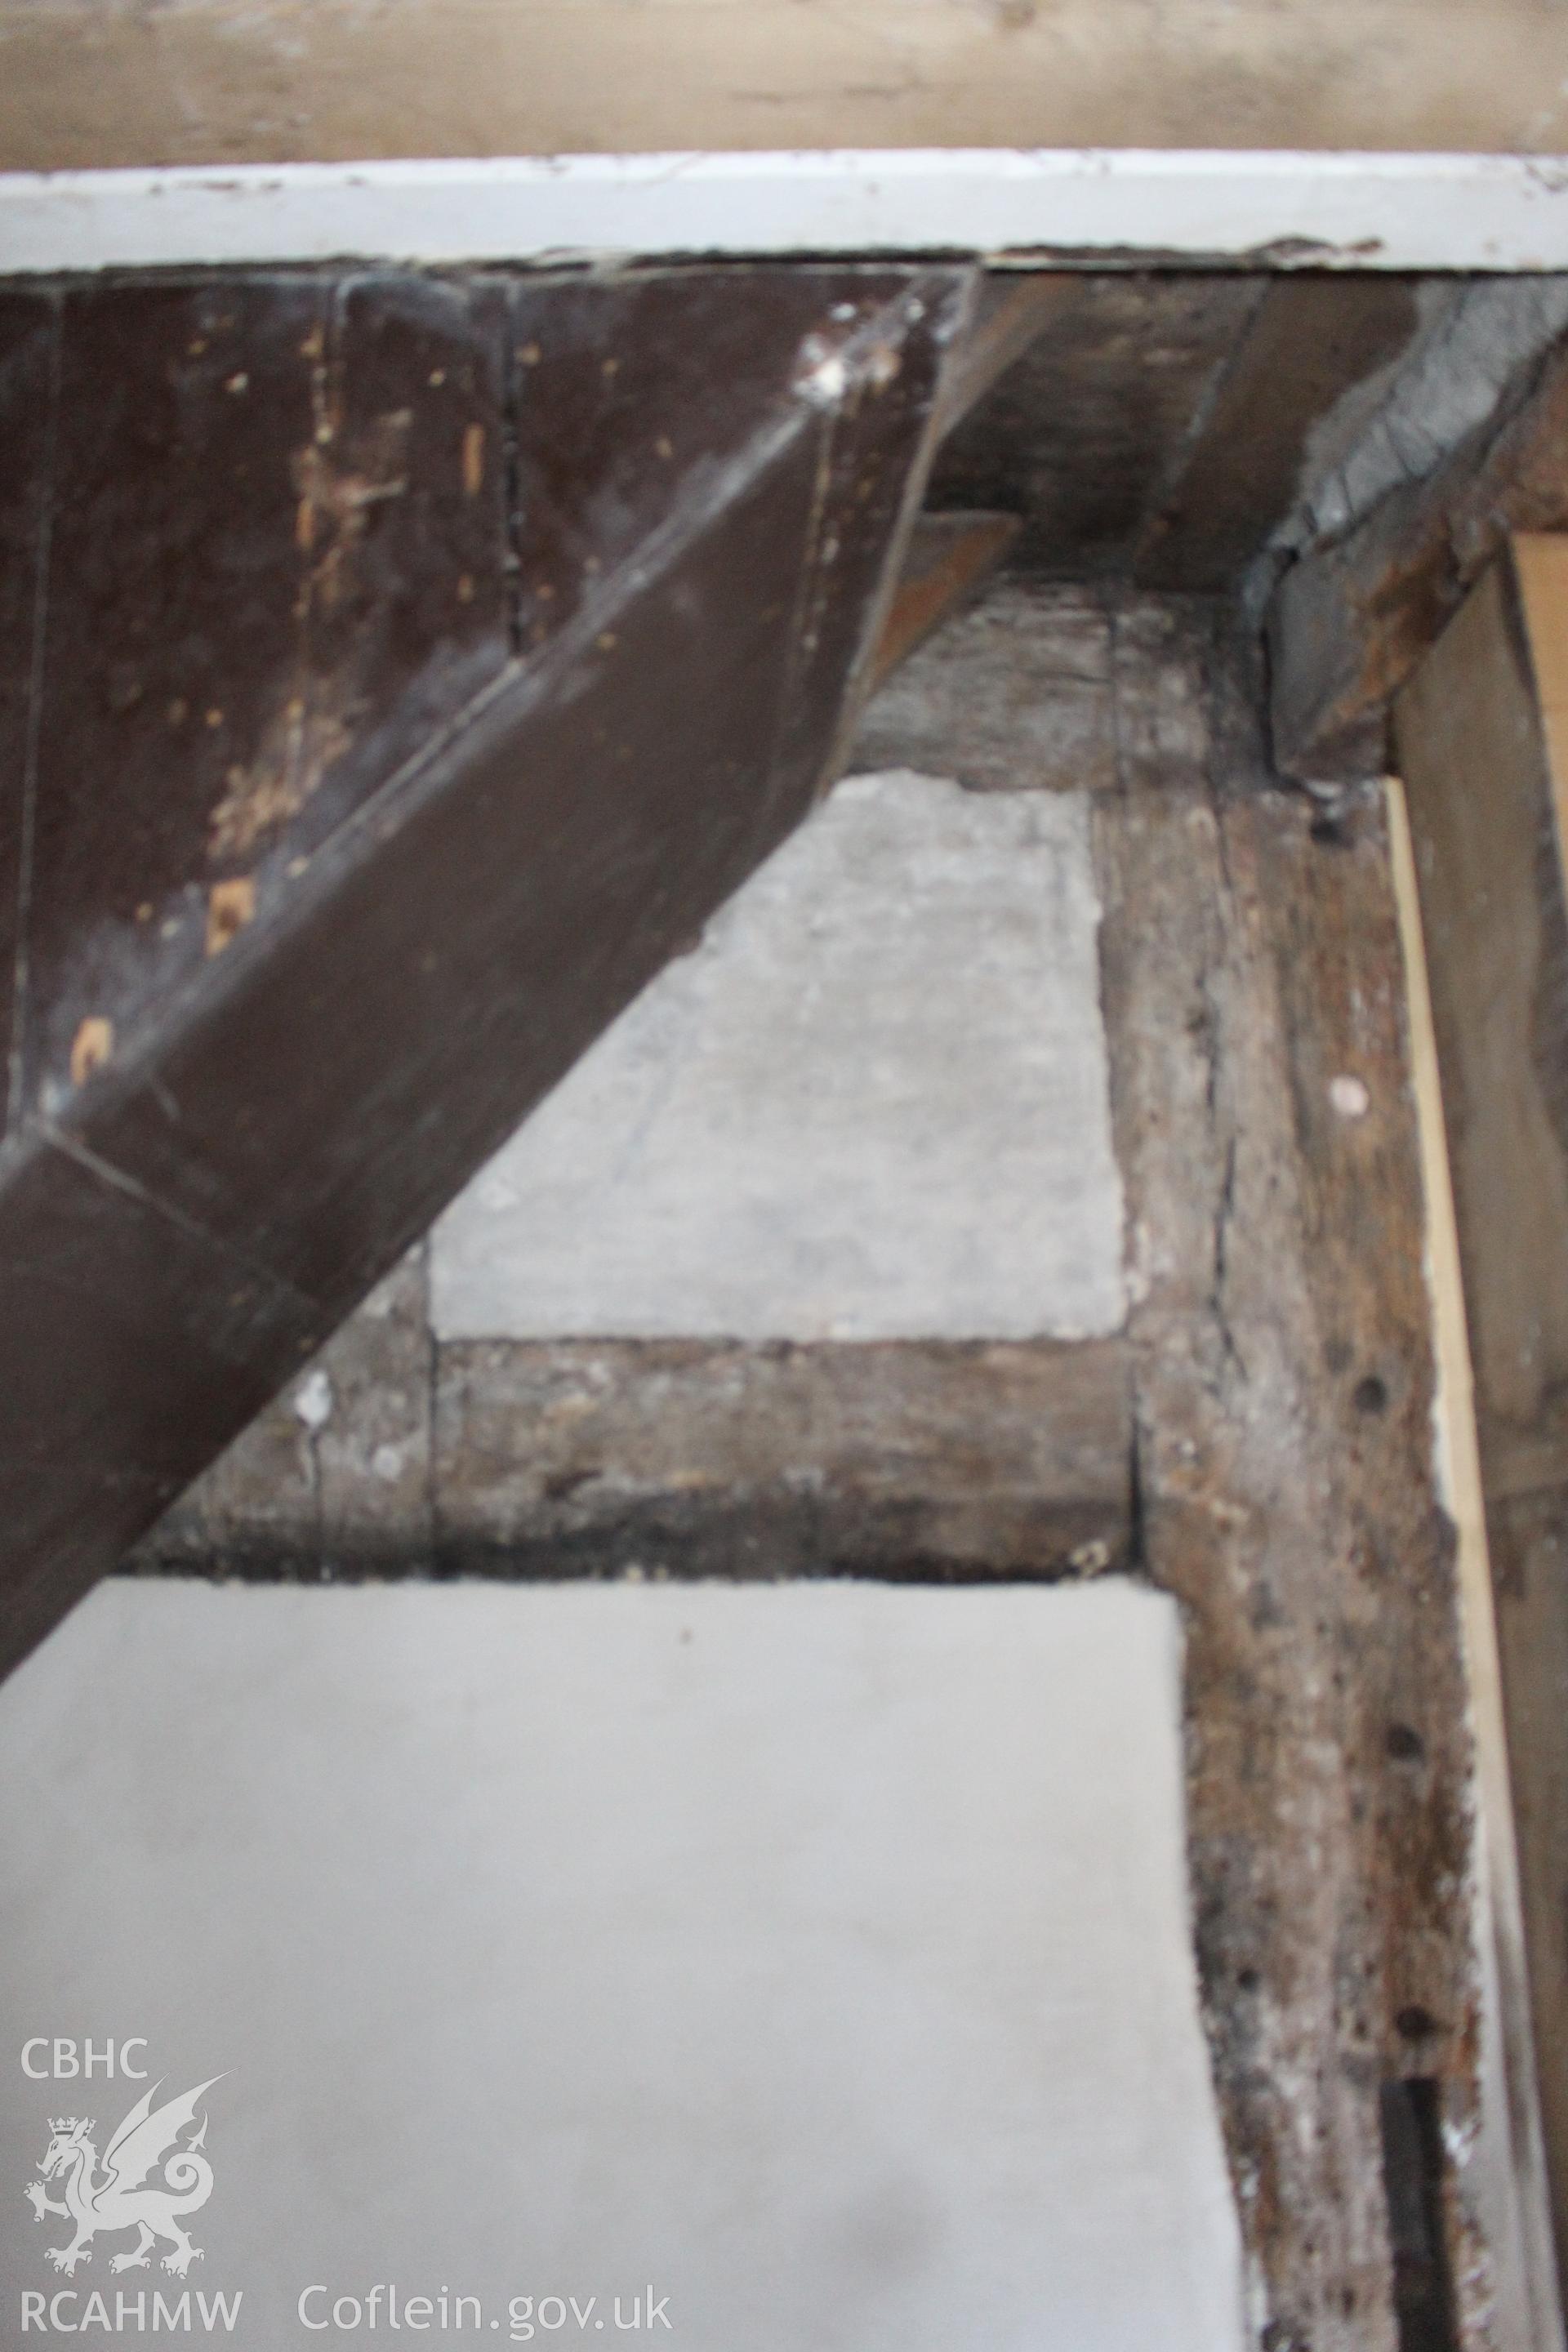 Colour photograph showing interior view of timber frame and plastered wall at Porth y Dwr, Clwyd Street, Ruthin. Photograph taken during survey conducted by Geoff Ward on 9th October 2014.